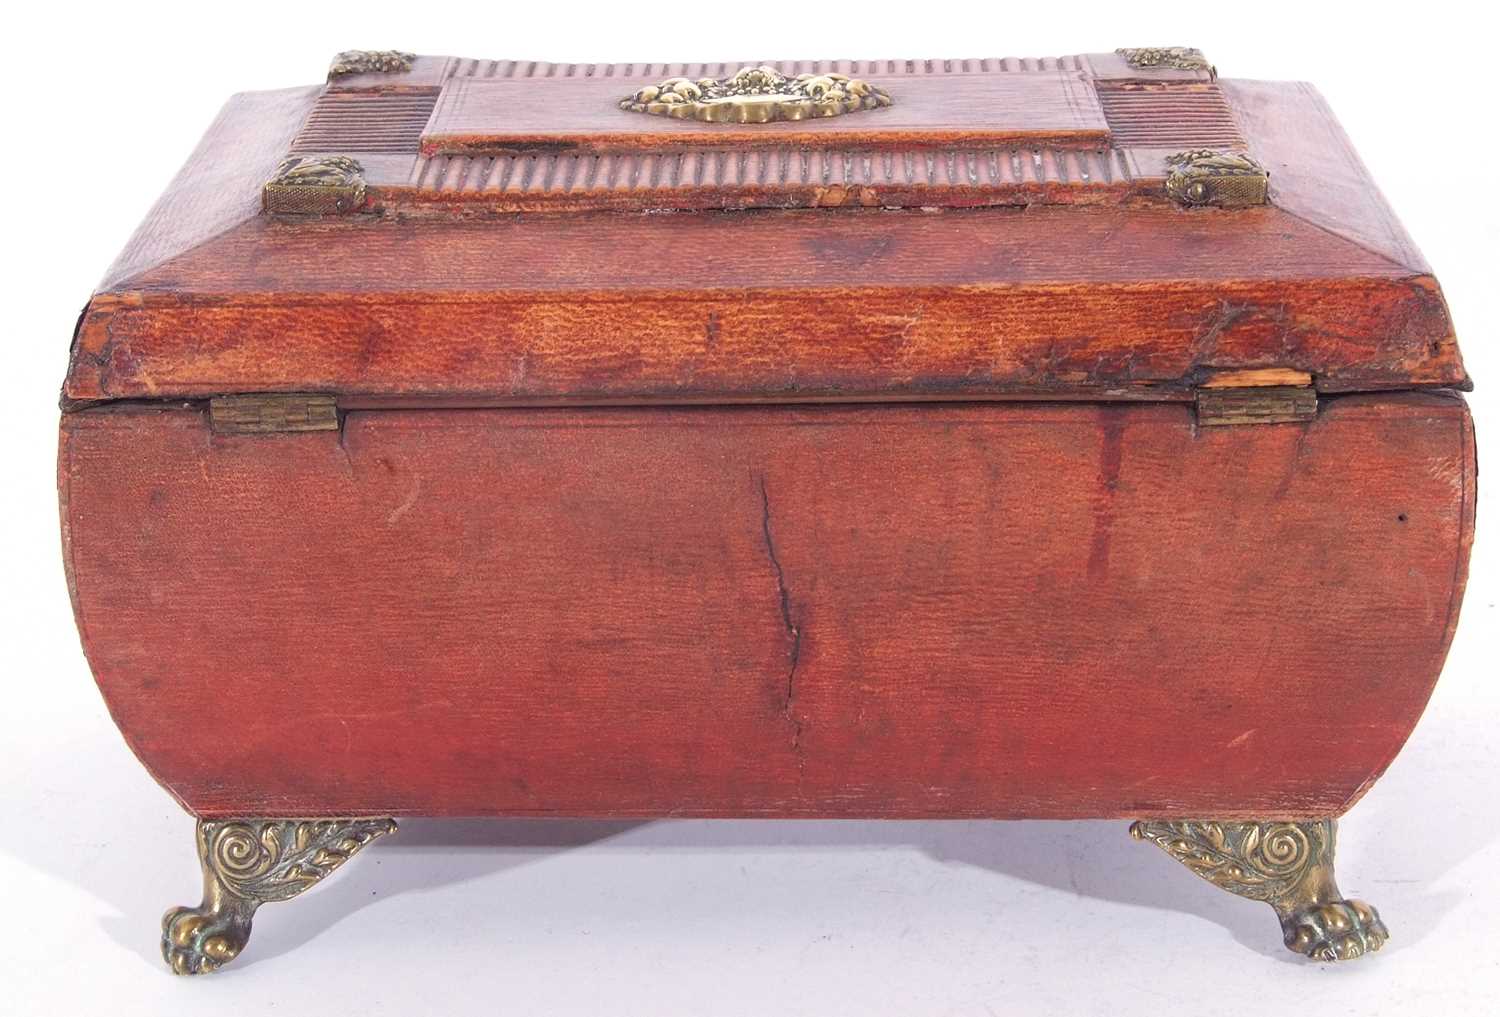 Regency red leather and brass embossed jewel box, hinged lid with silk lined interior, single drawer - Image 3 of 11